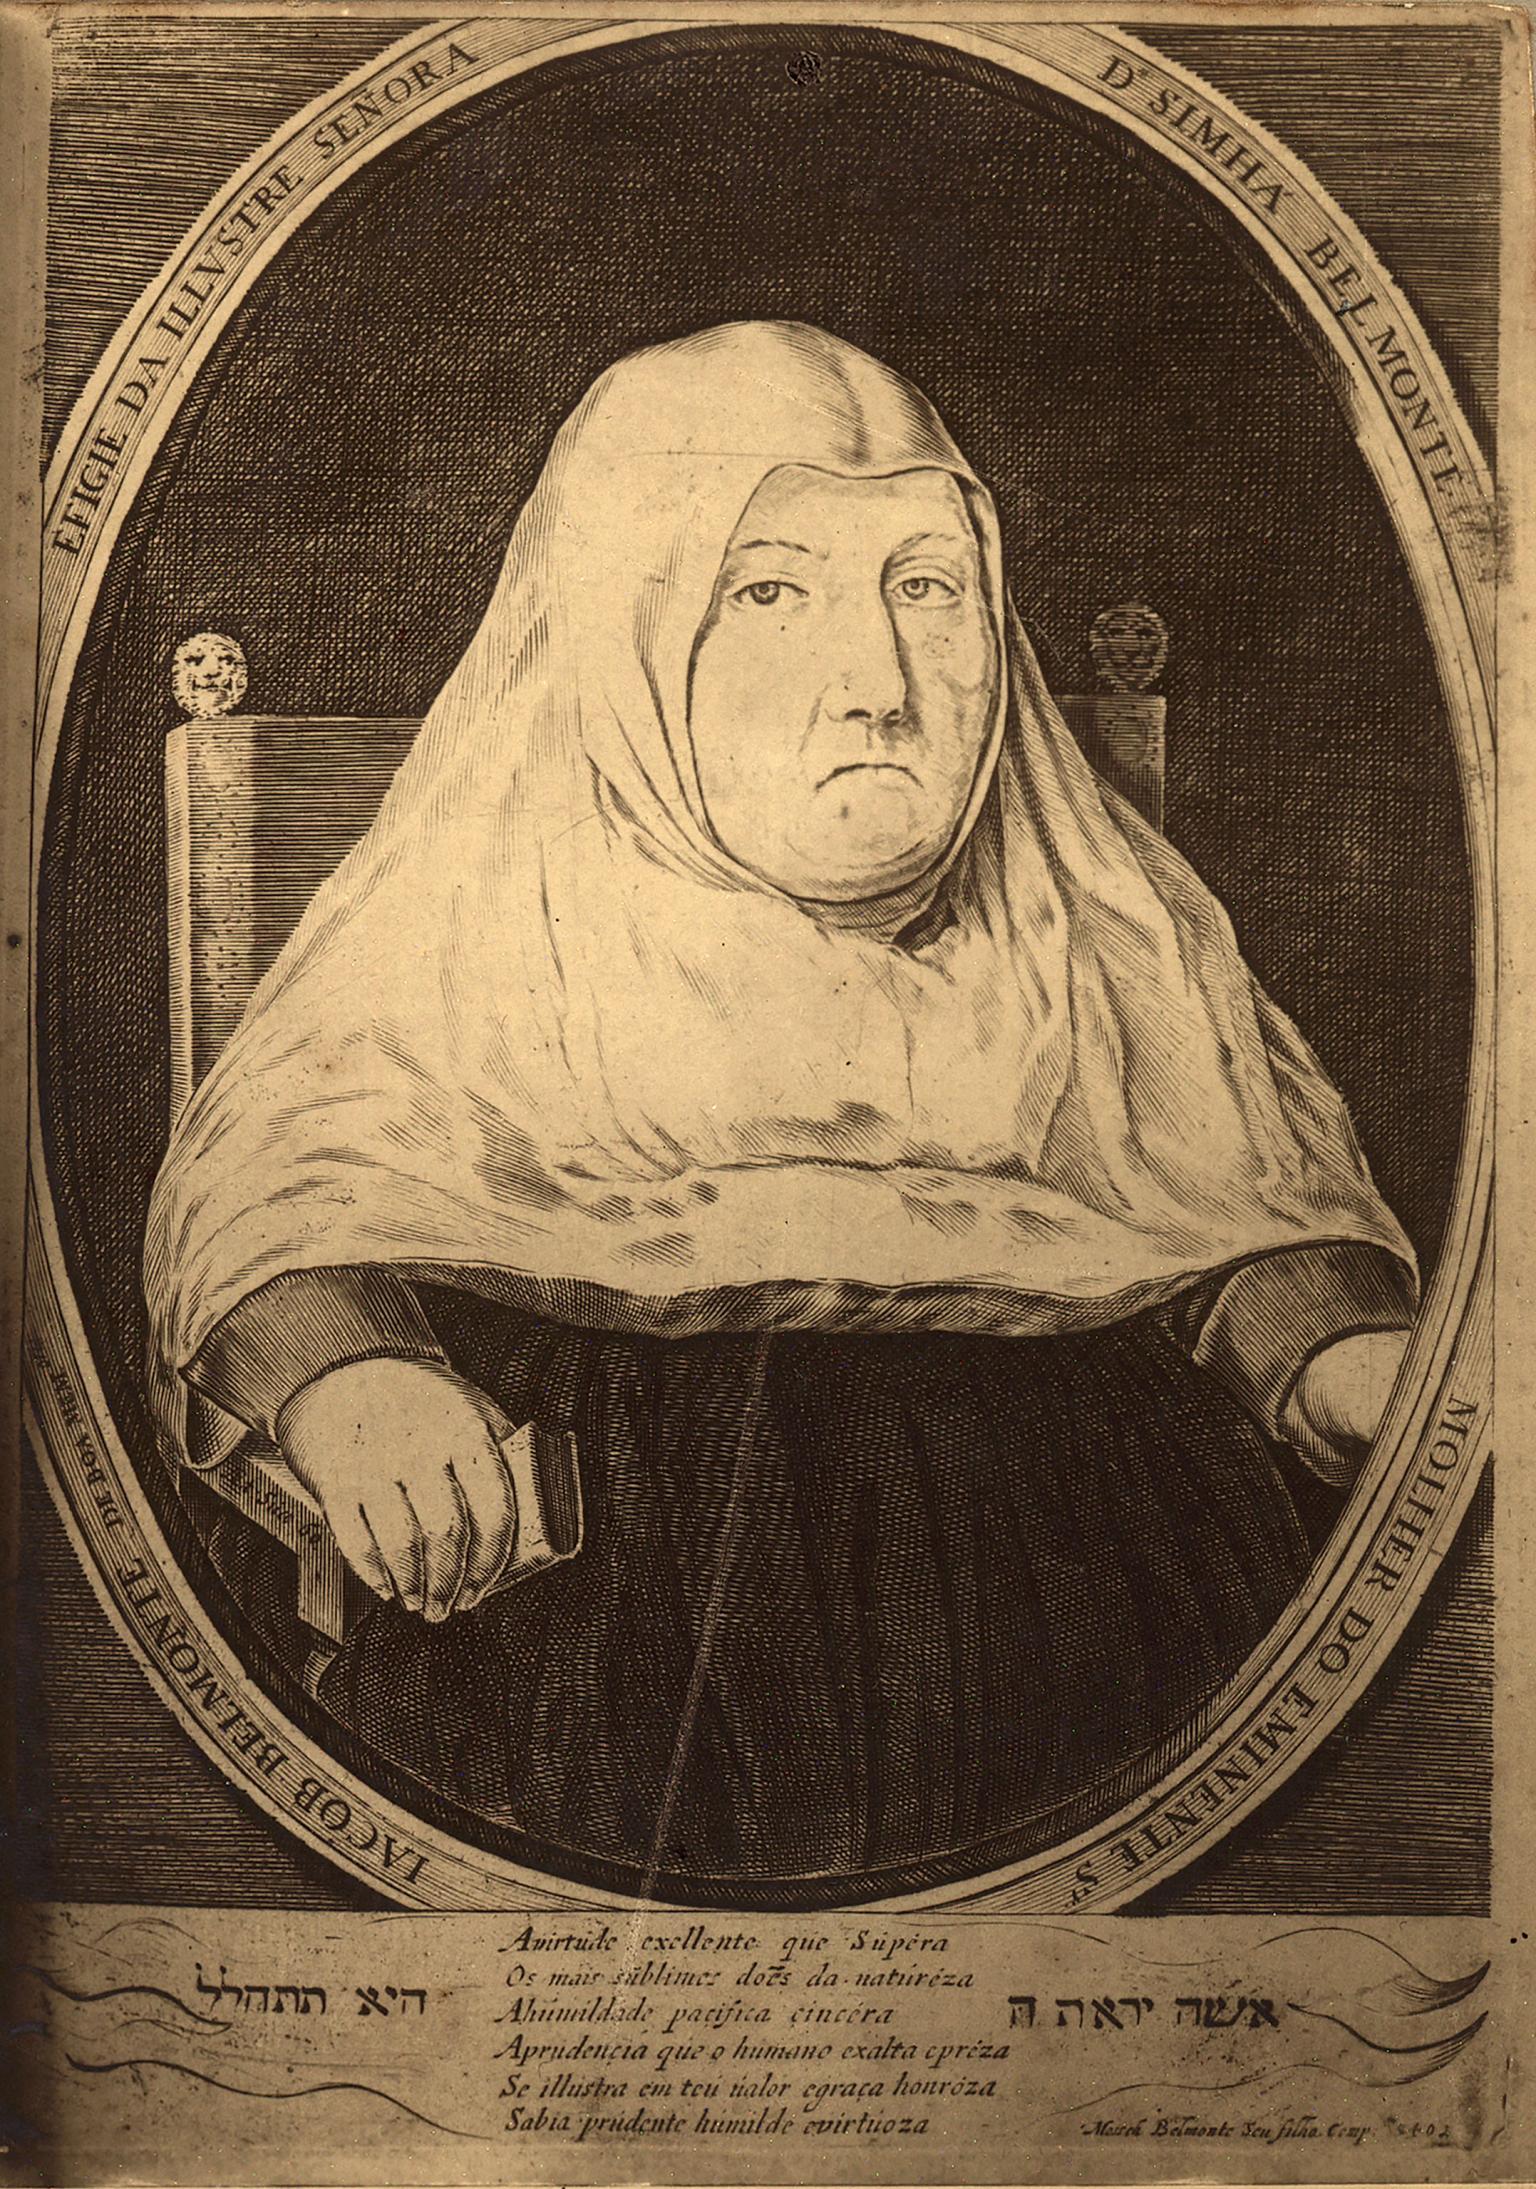 Portrait with circular border of seated older woman wearing wimple and stern expression and holding book in right hand, with Portuguese and Hebrew text below and around portrait. 